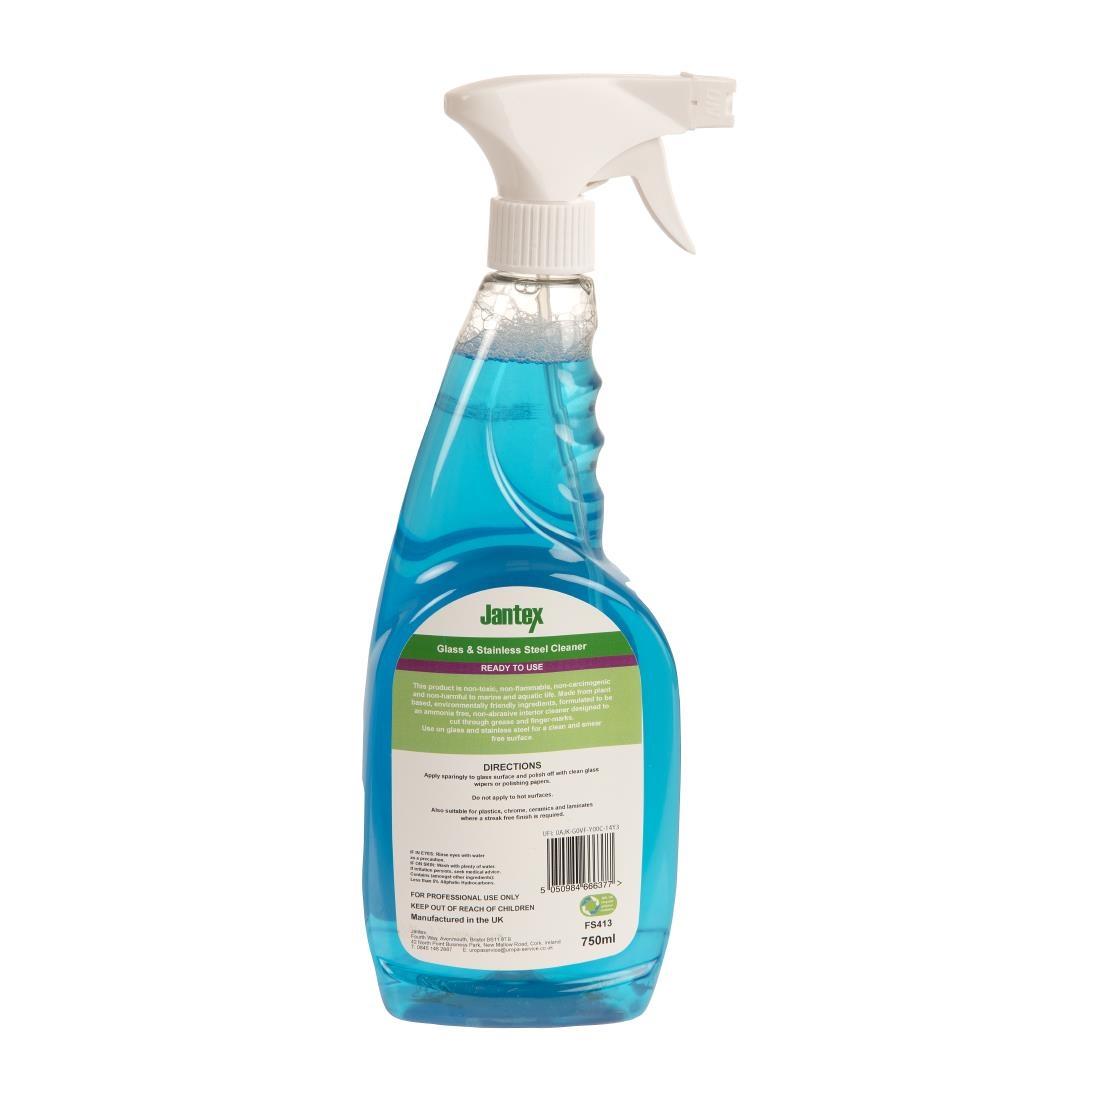 Jantex Green Glass and Stainless Steel Cleaner Ready To Use 750ml - FS413  - 3